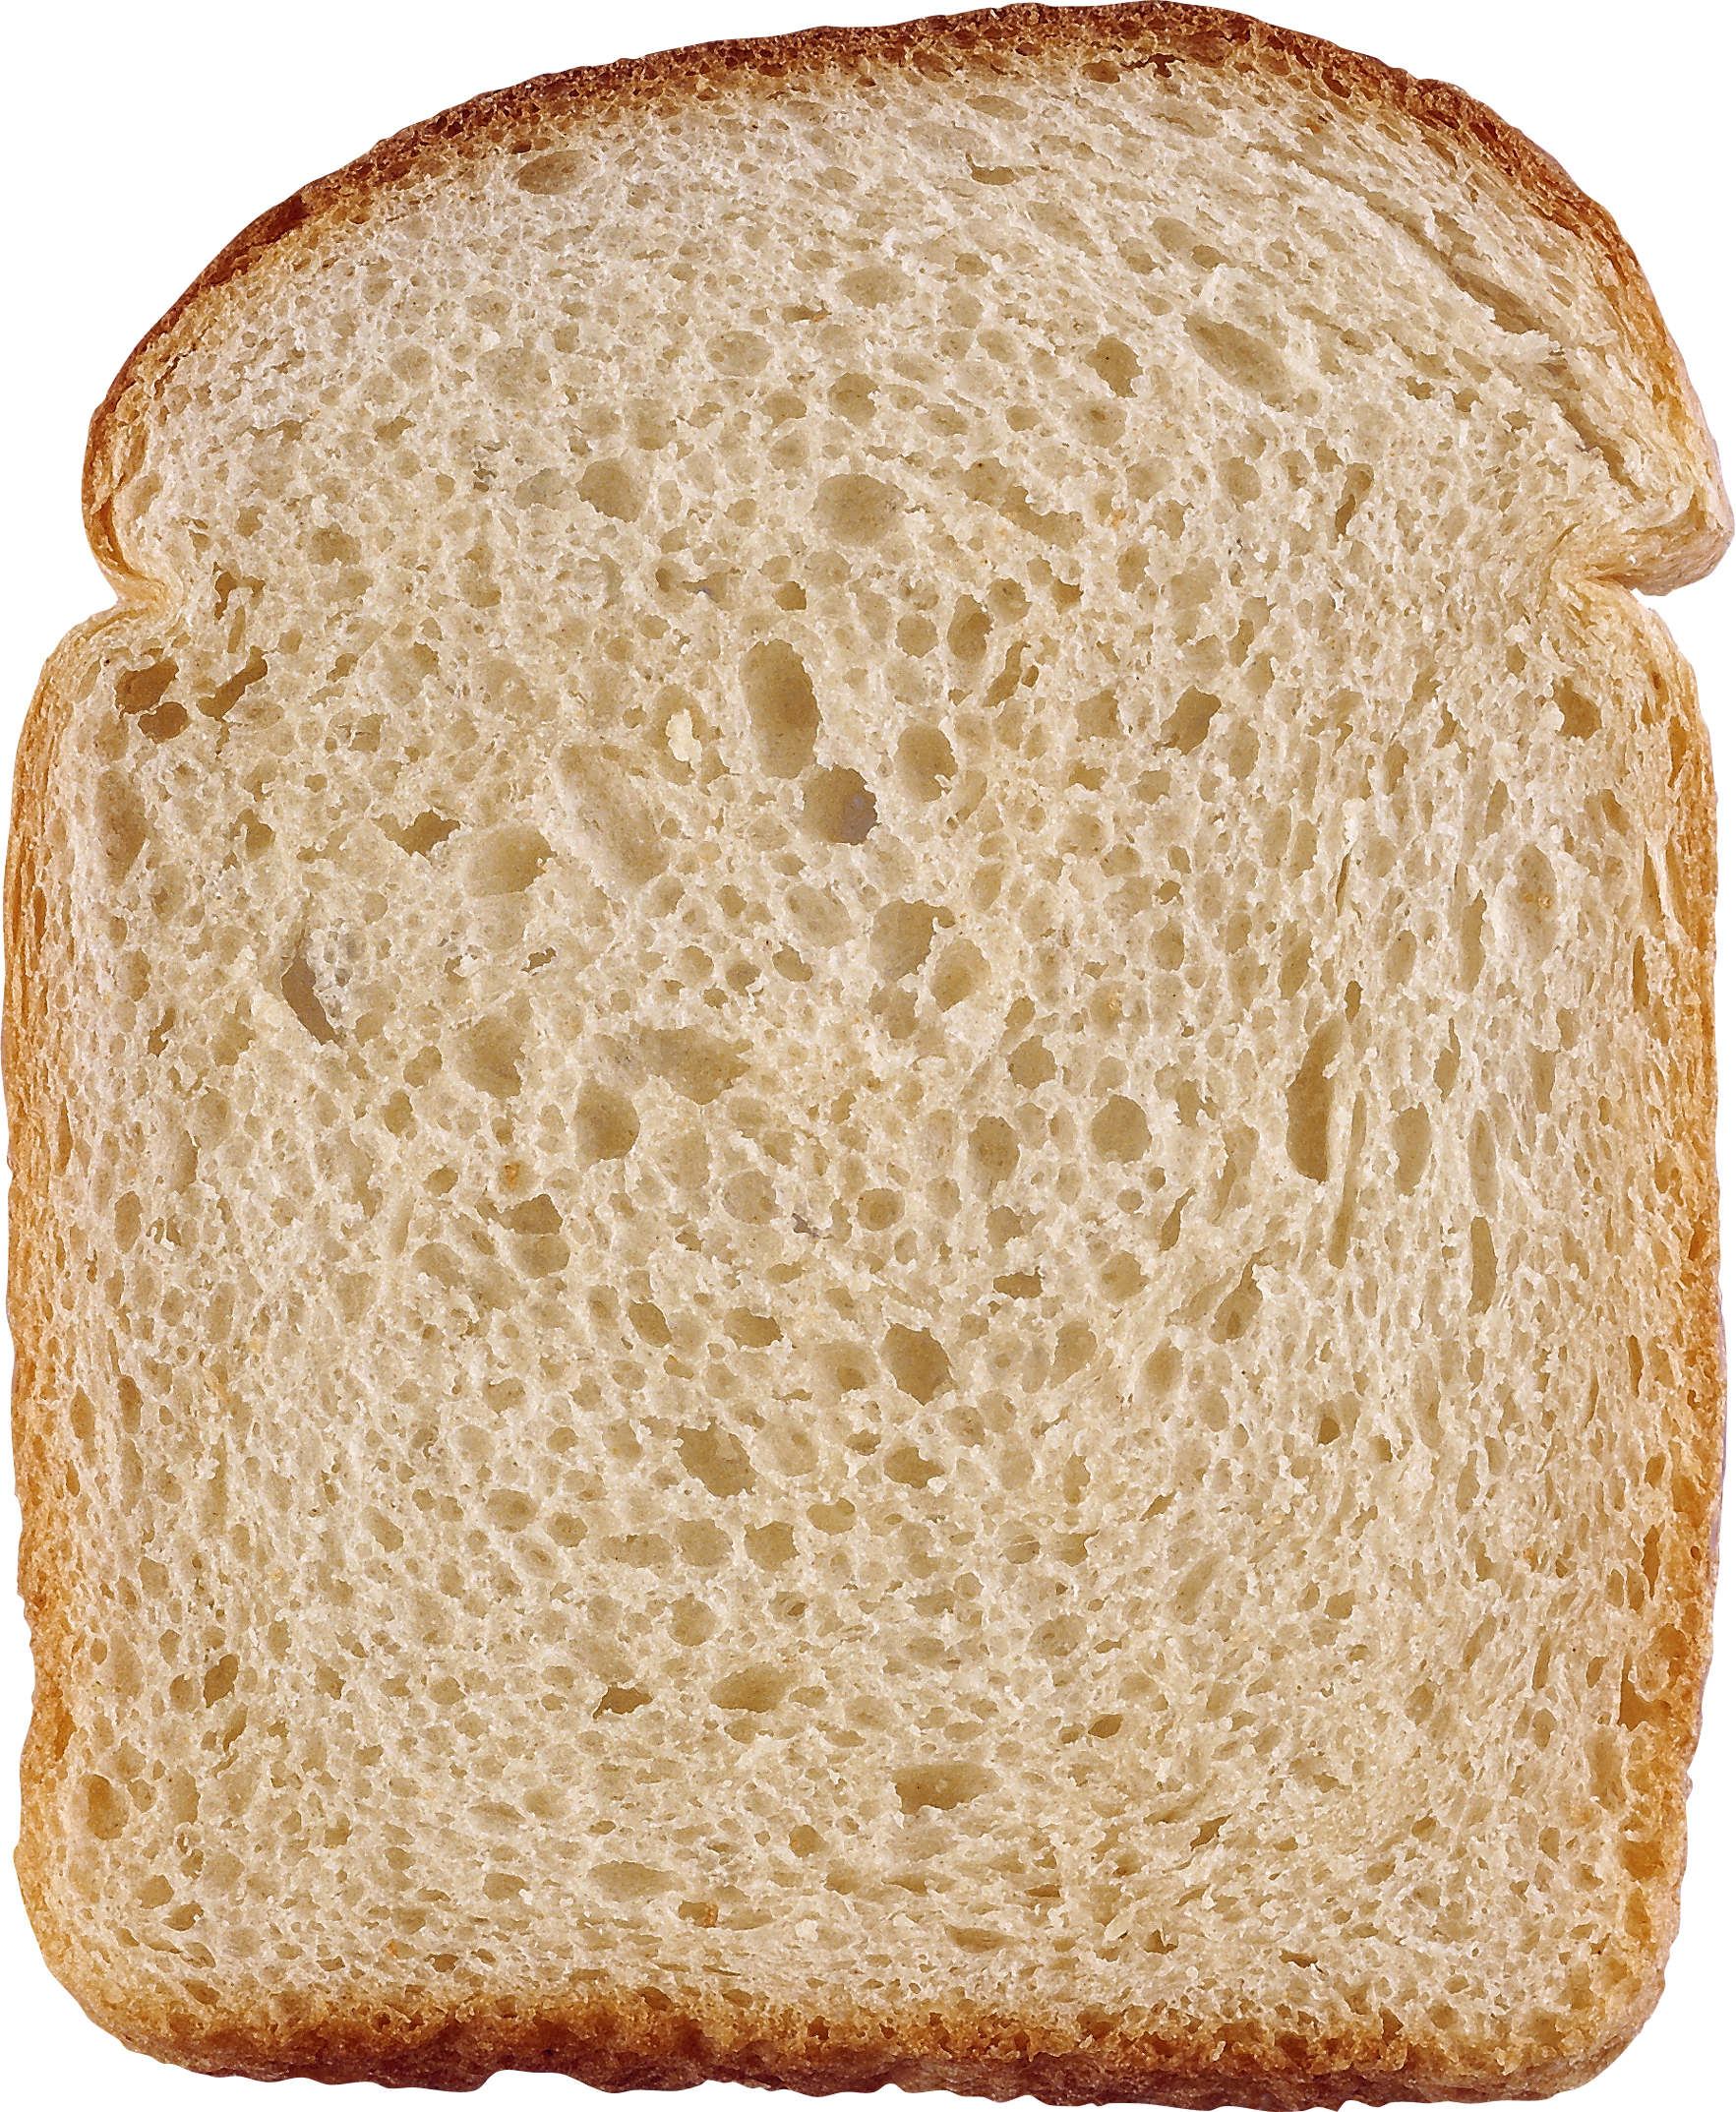 Wholewheat Cereal Bread PNG HD Quality